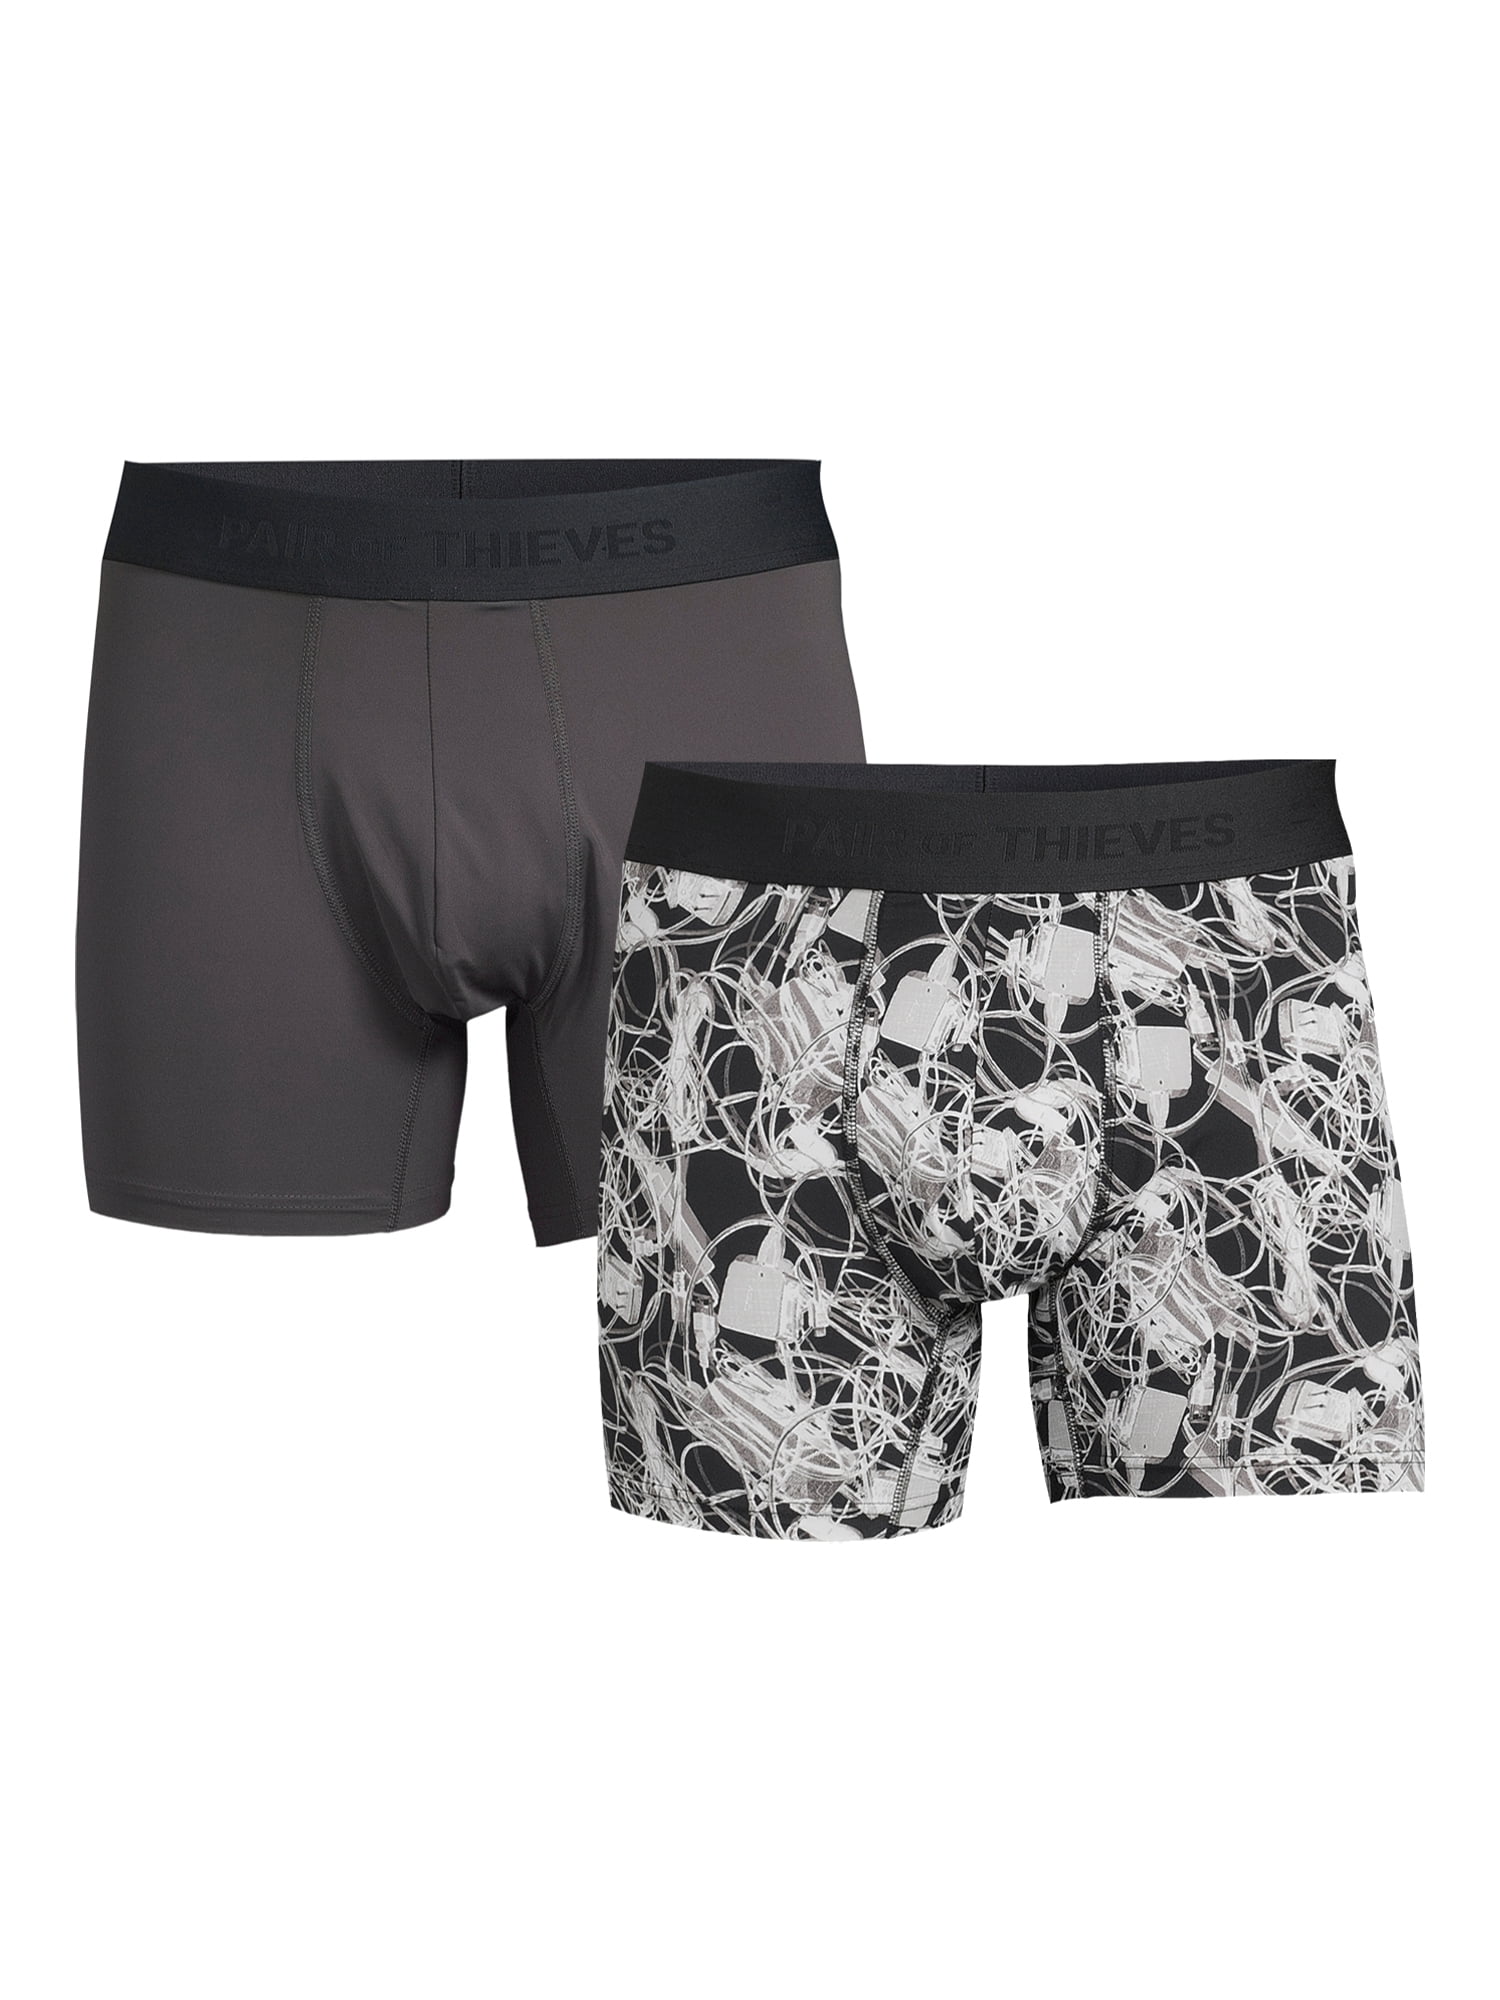 Peace boxer briefs 2-pack, Pair of Thieves